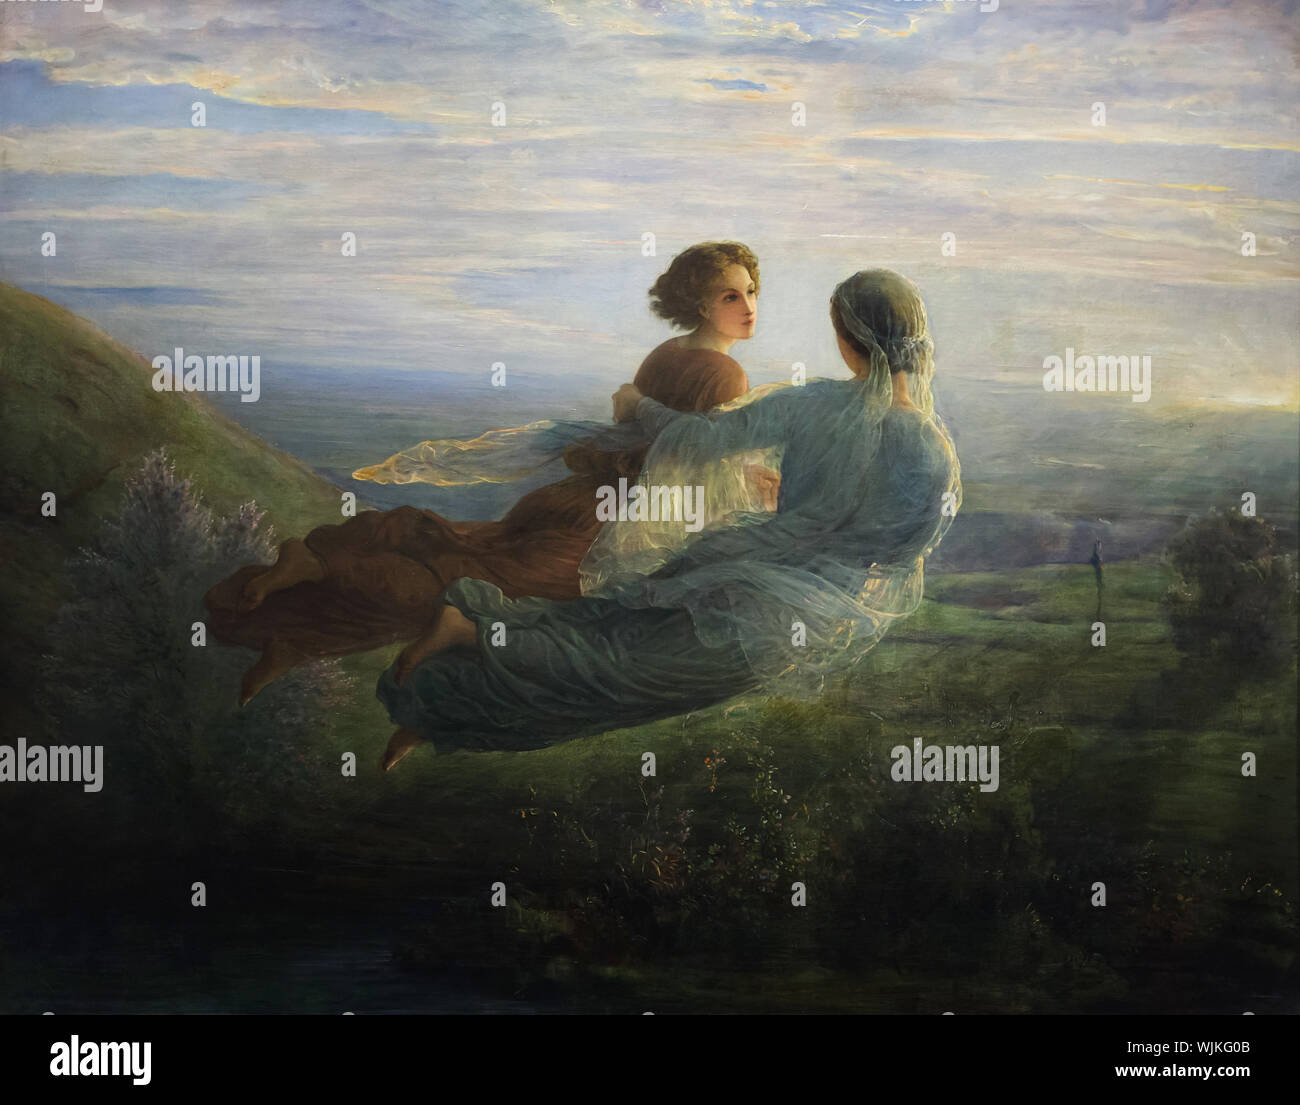 Painting 'The Flight of the Soul' ('Le Vol de l'âme') from the cycles 'The Poem of the Soul' (1835-1855) by French symbolist painter Louis Janmot on display in the Museum of Fine Arts (Musée des Beaux-Arts de Lyon) in Lyon, France. Stock Photo